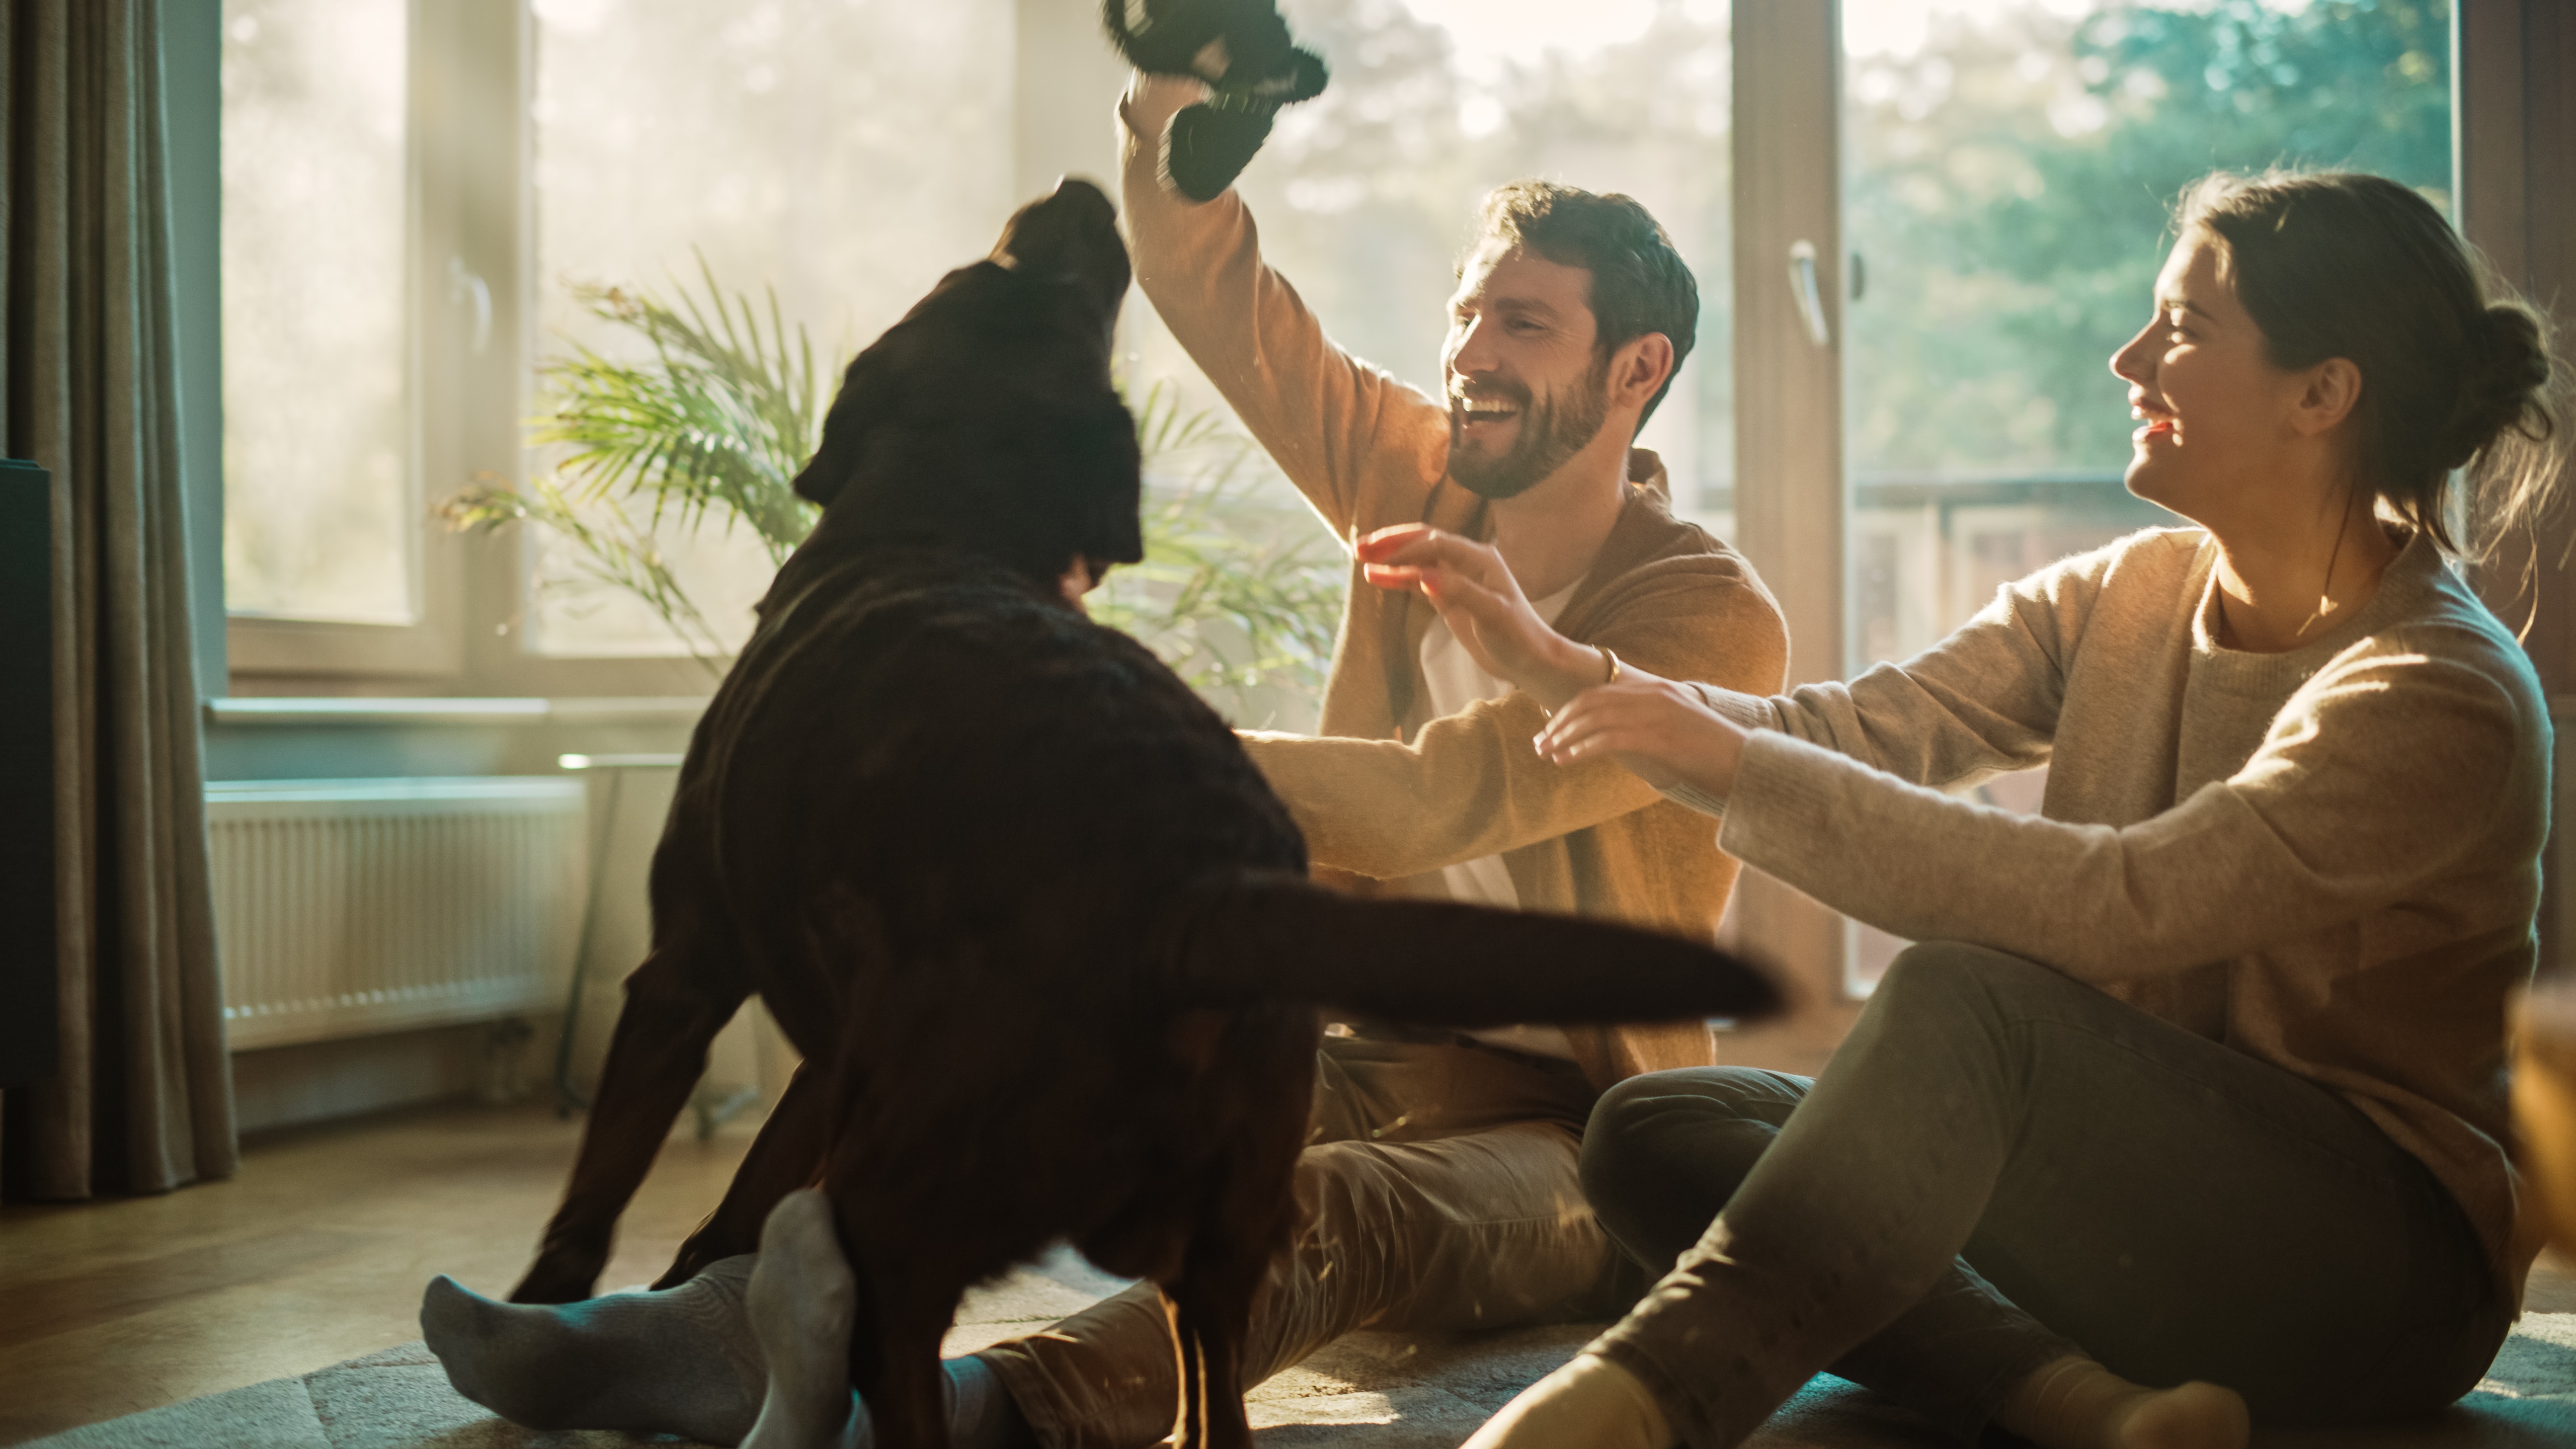 A happy couple is seen playing with their dog | Source: Shutterstock